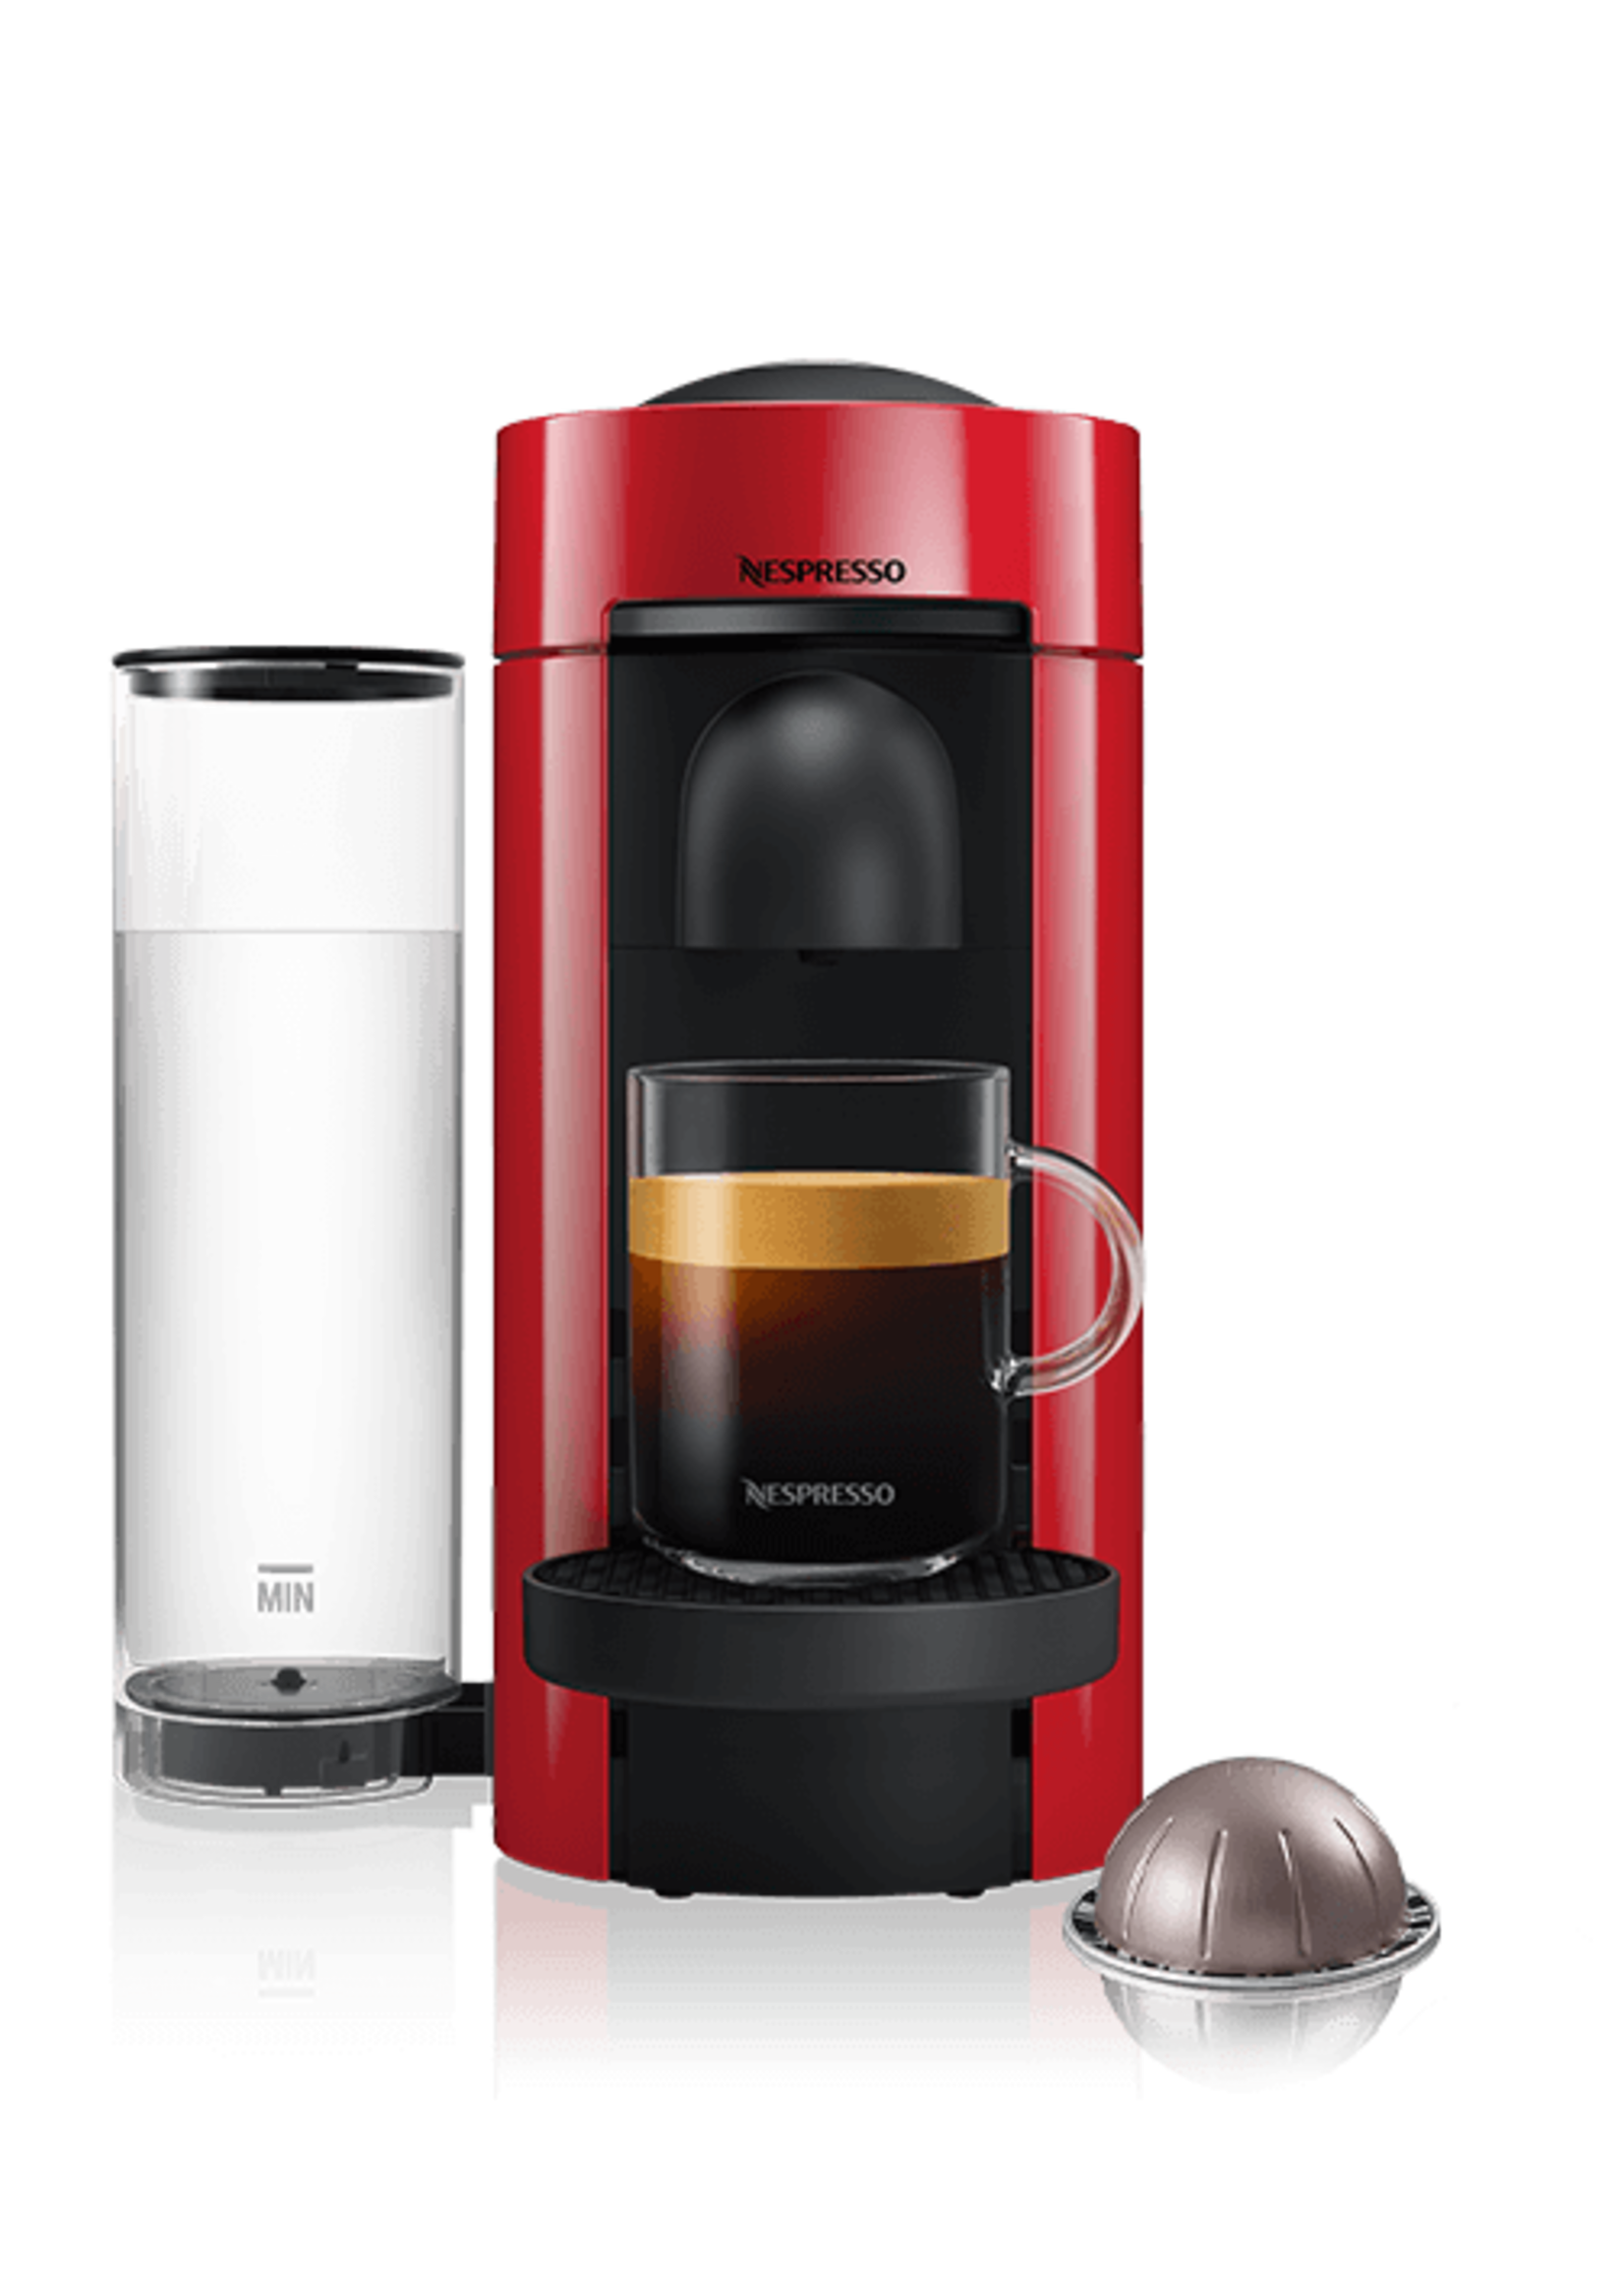 Magimix Vertuo Plus (Rood) - Koffiemachine